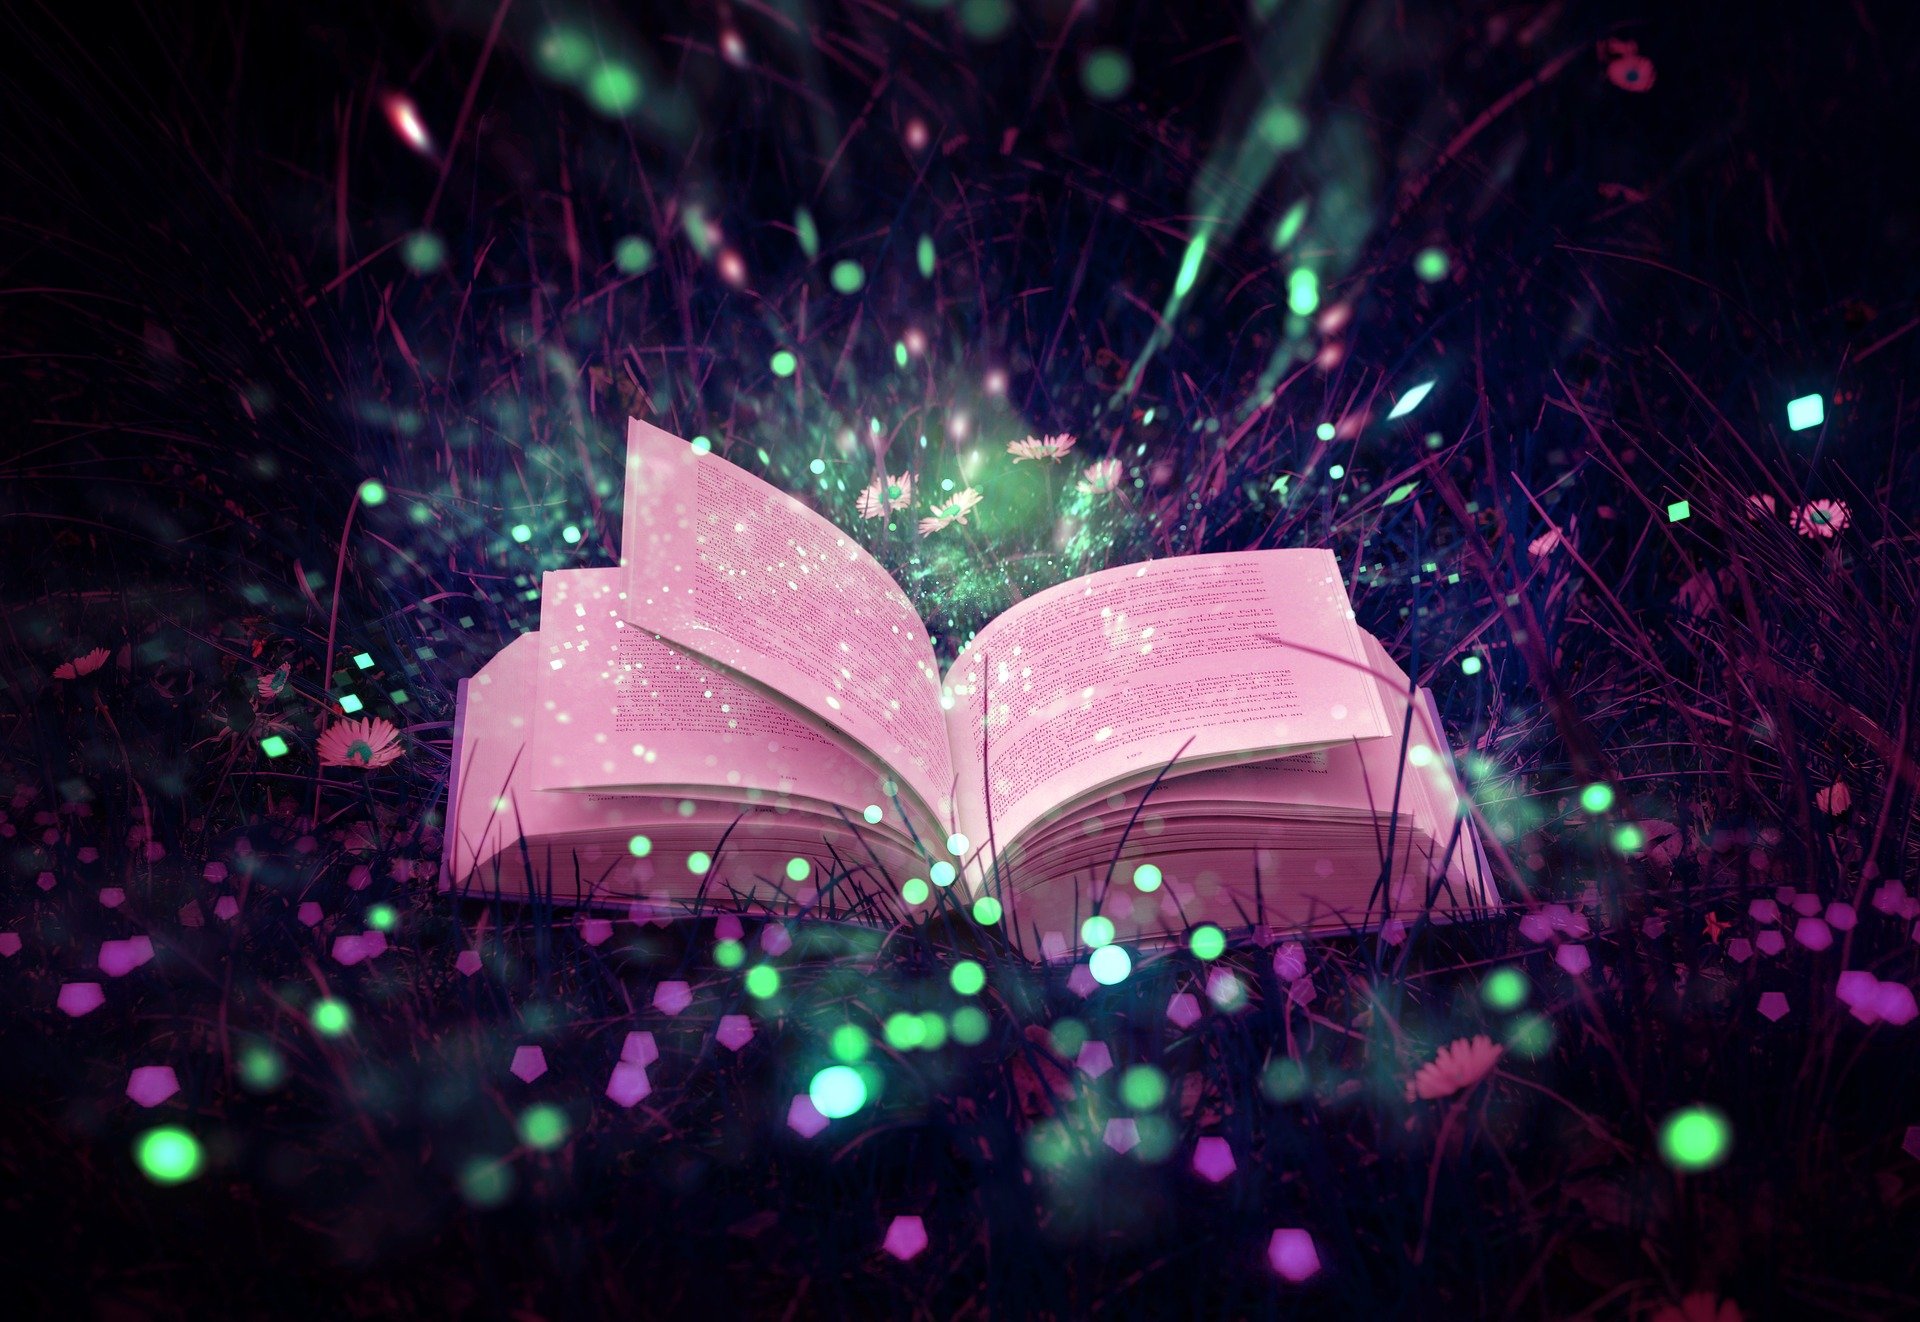 An open book surrounded by colorful light motes, laying on a patch of dark green foliage.